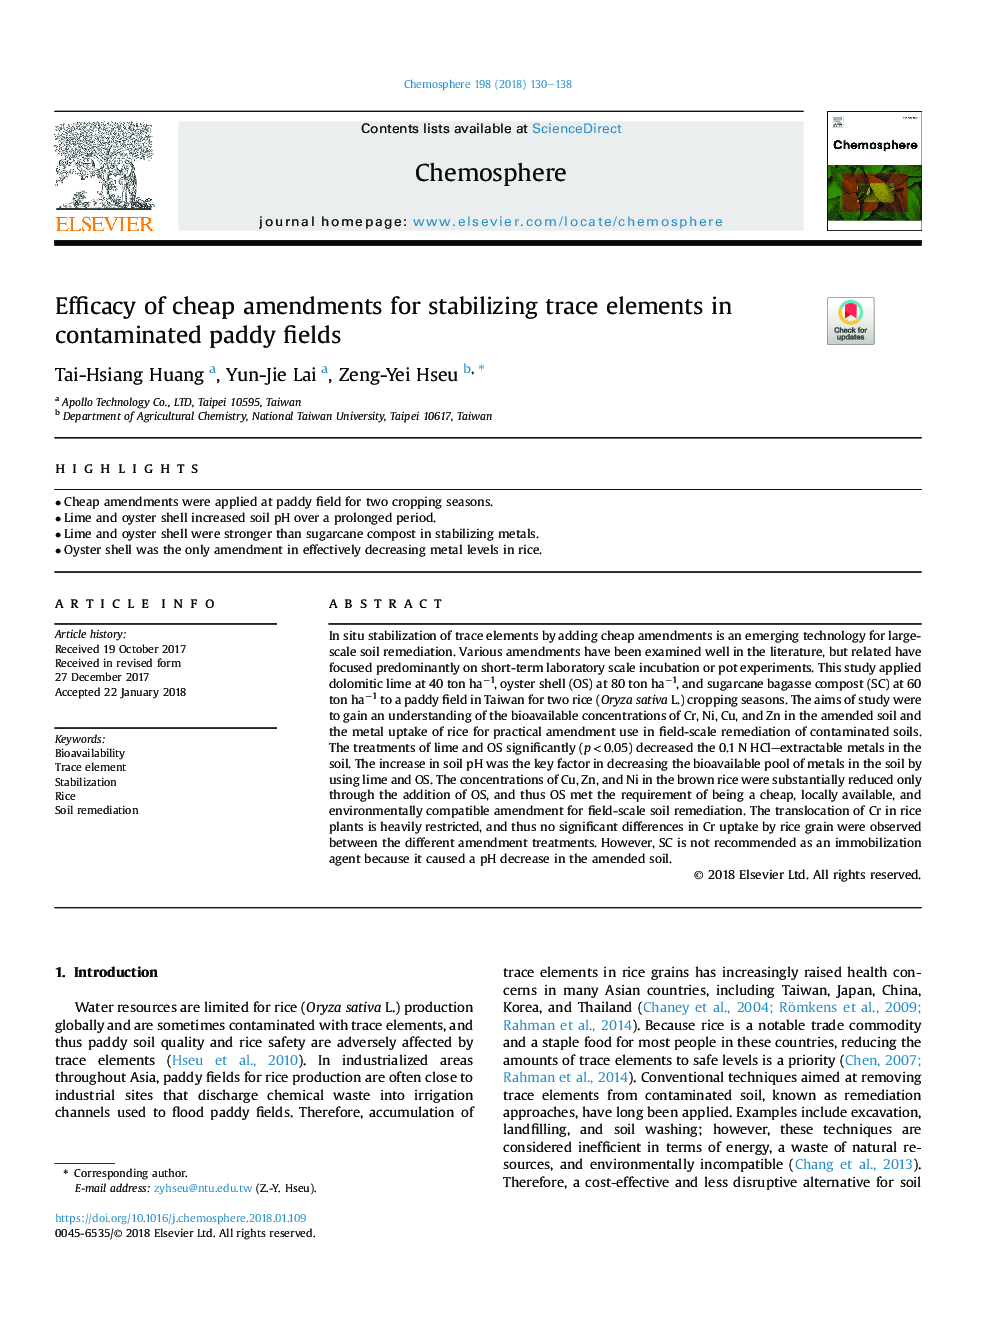 Efficacy of cheap amendments for stabilizing trace elements in contaminated paddy fields